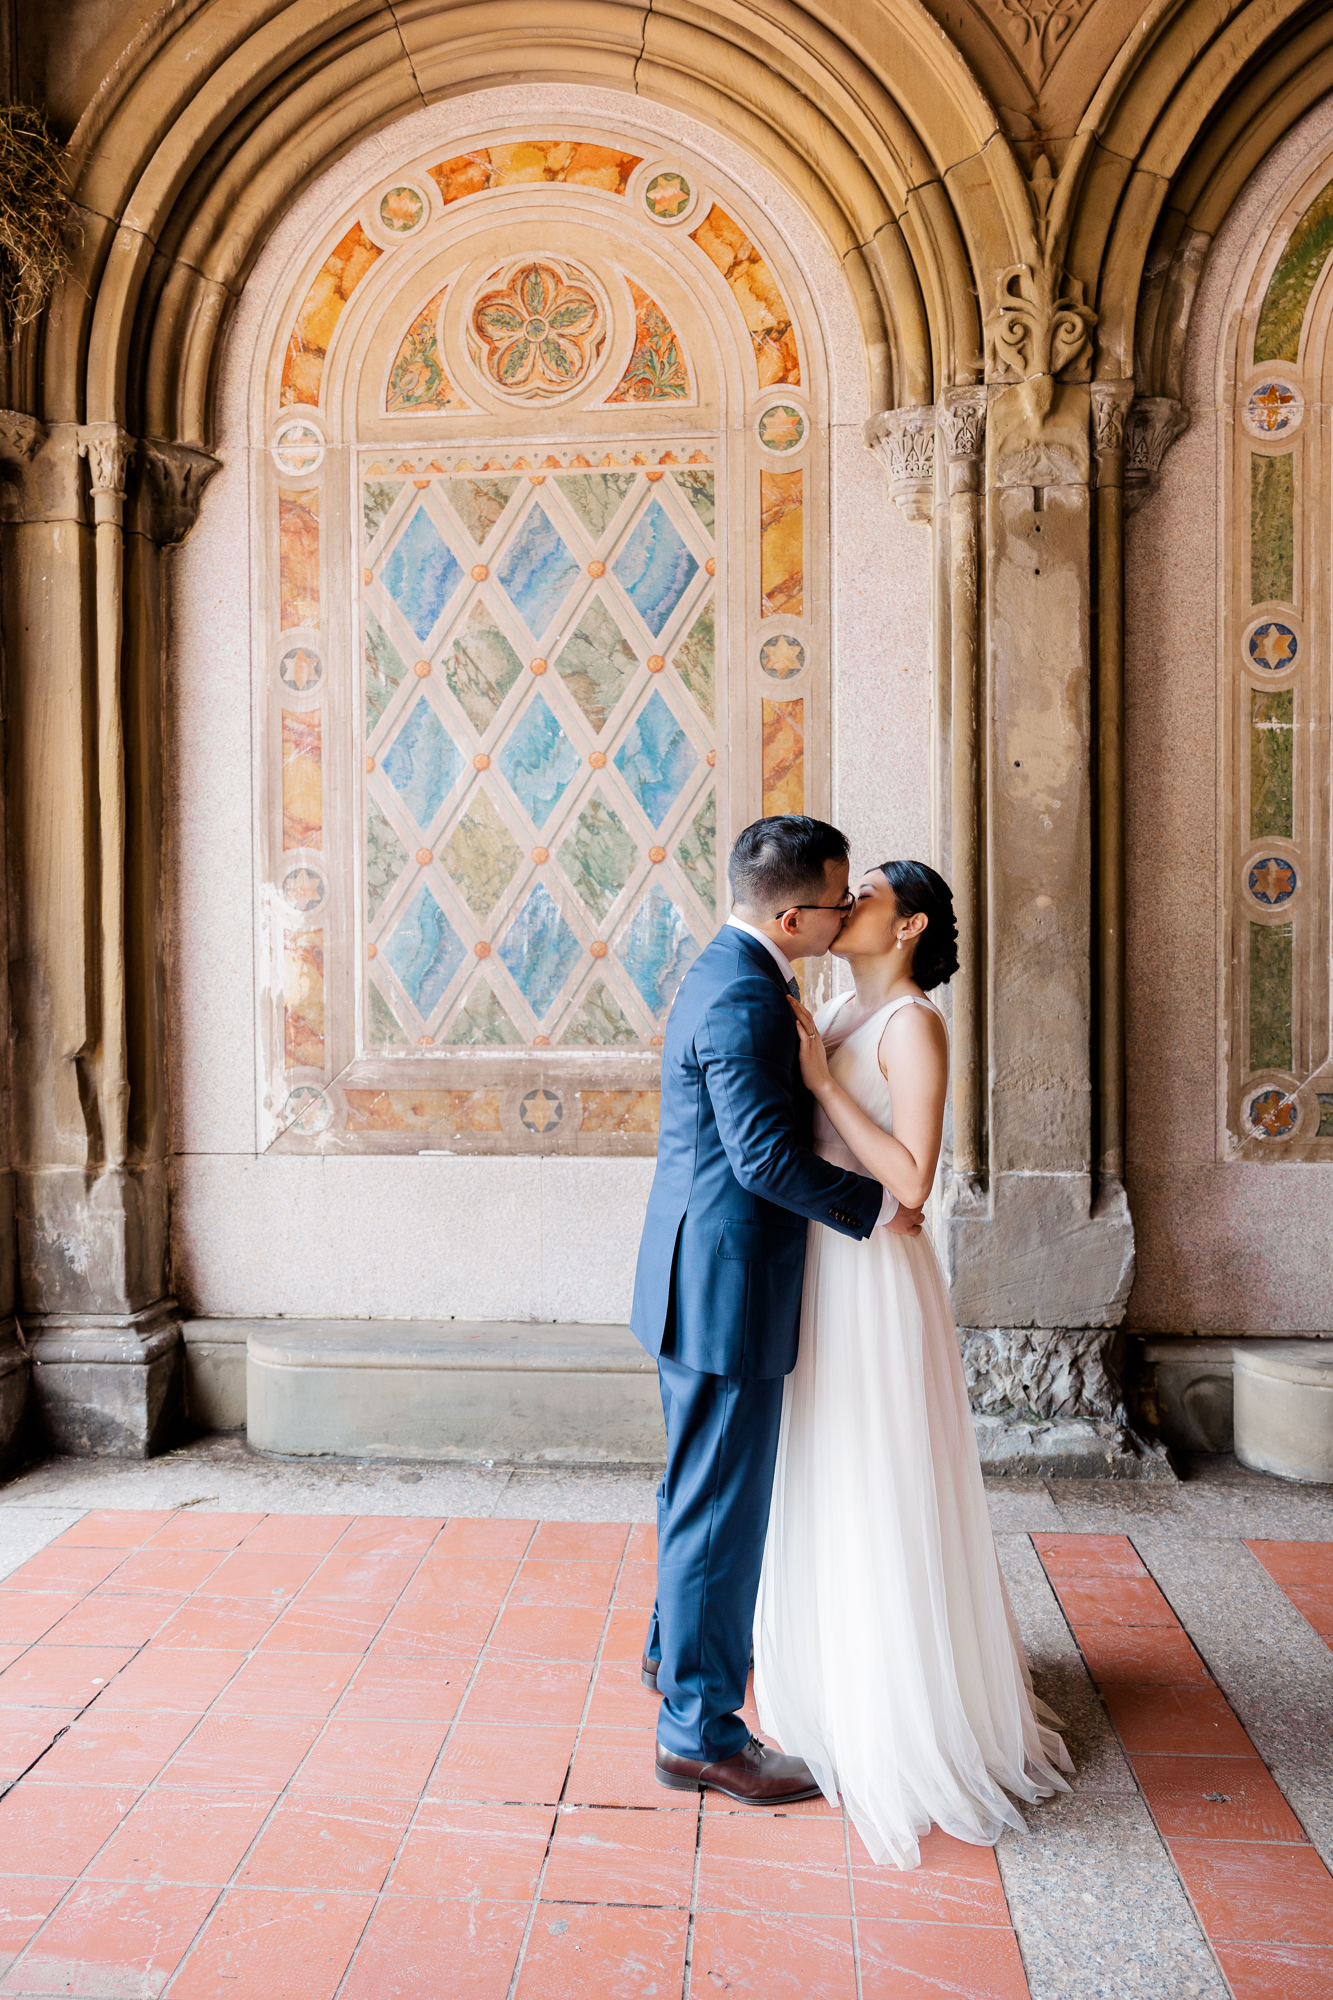 Joyful Photos of New York Elopement in DUMBO and Central Park